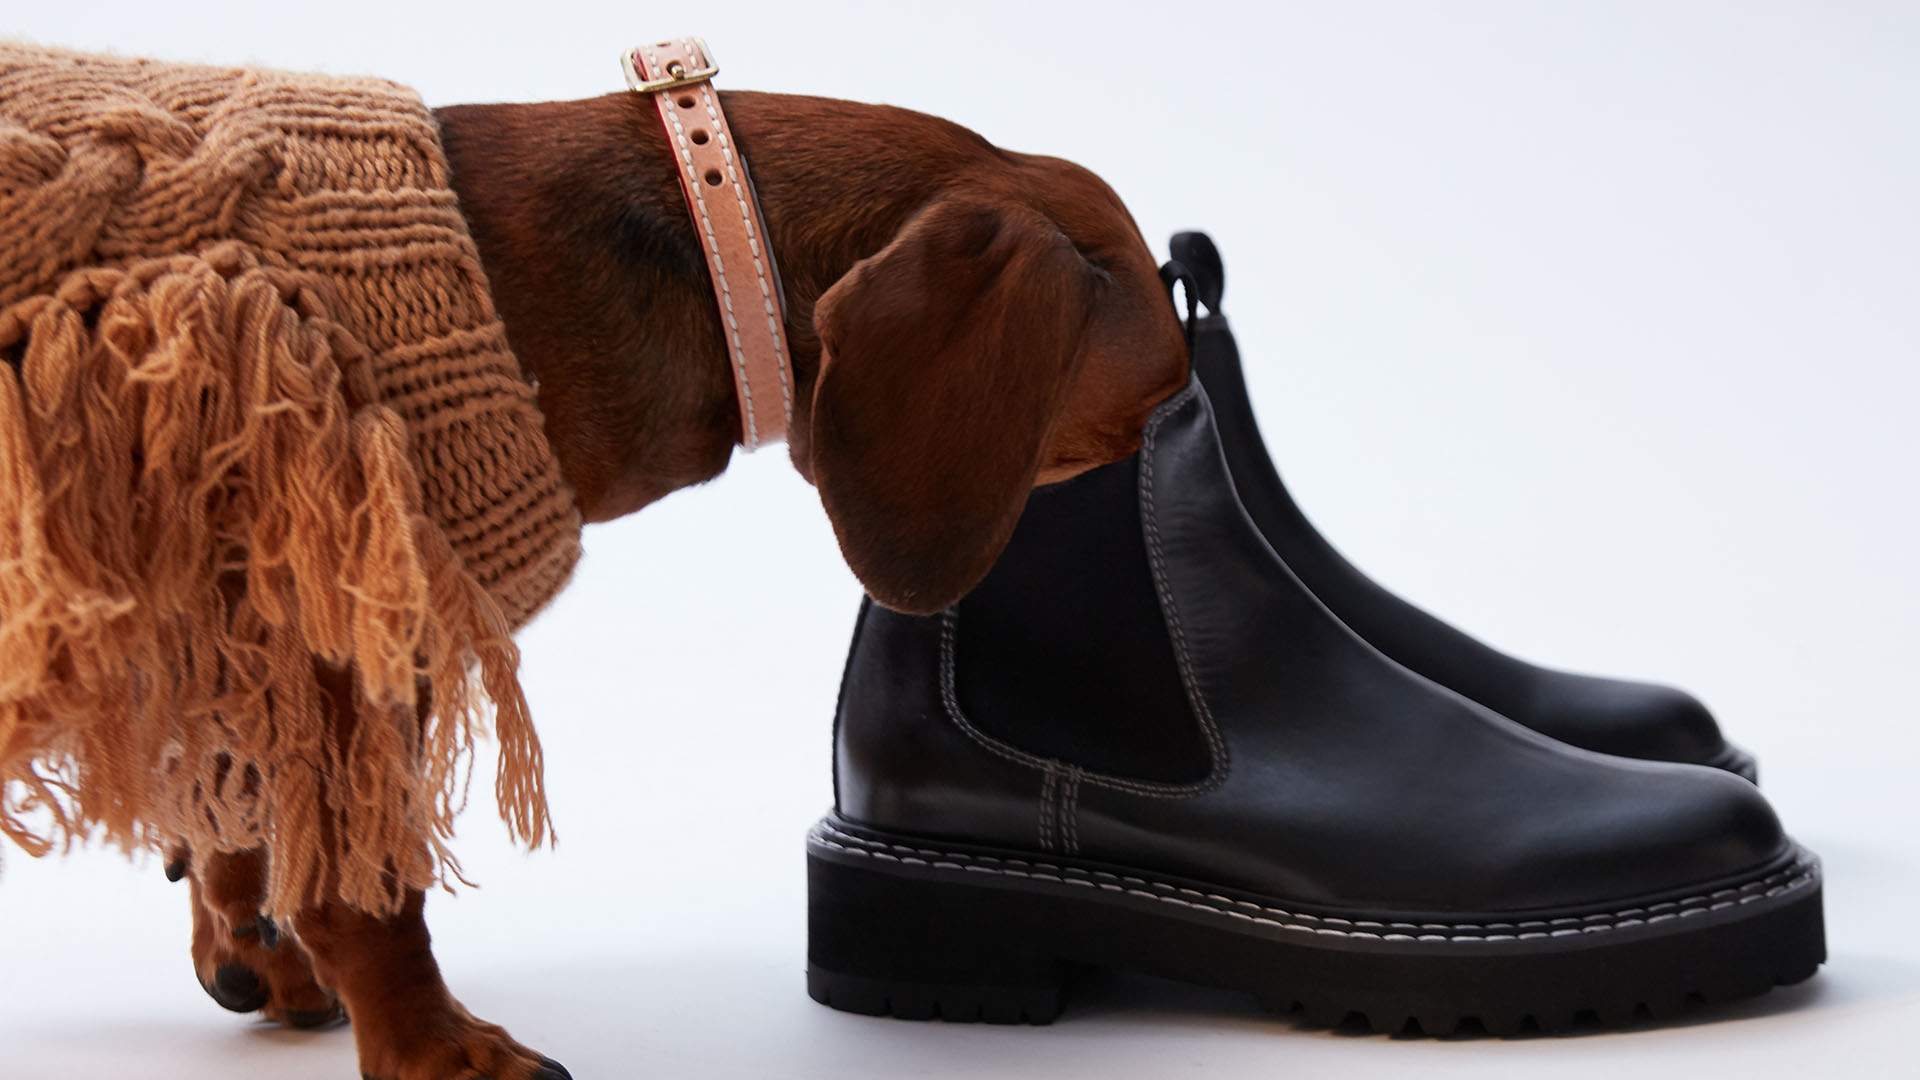 The Iconic Has Launched a Stylish New Pet Fashion Range for Supremely Adorable Dogs